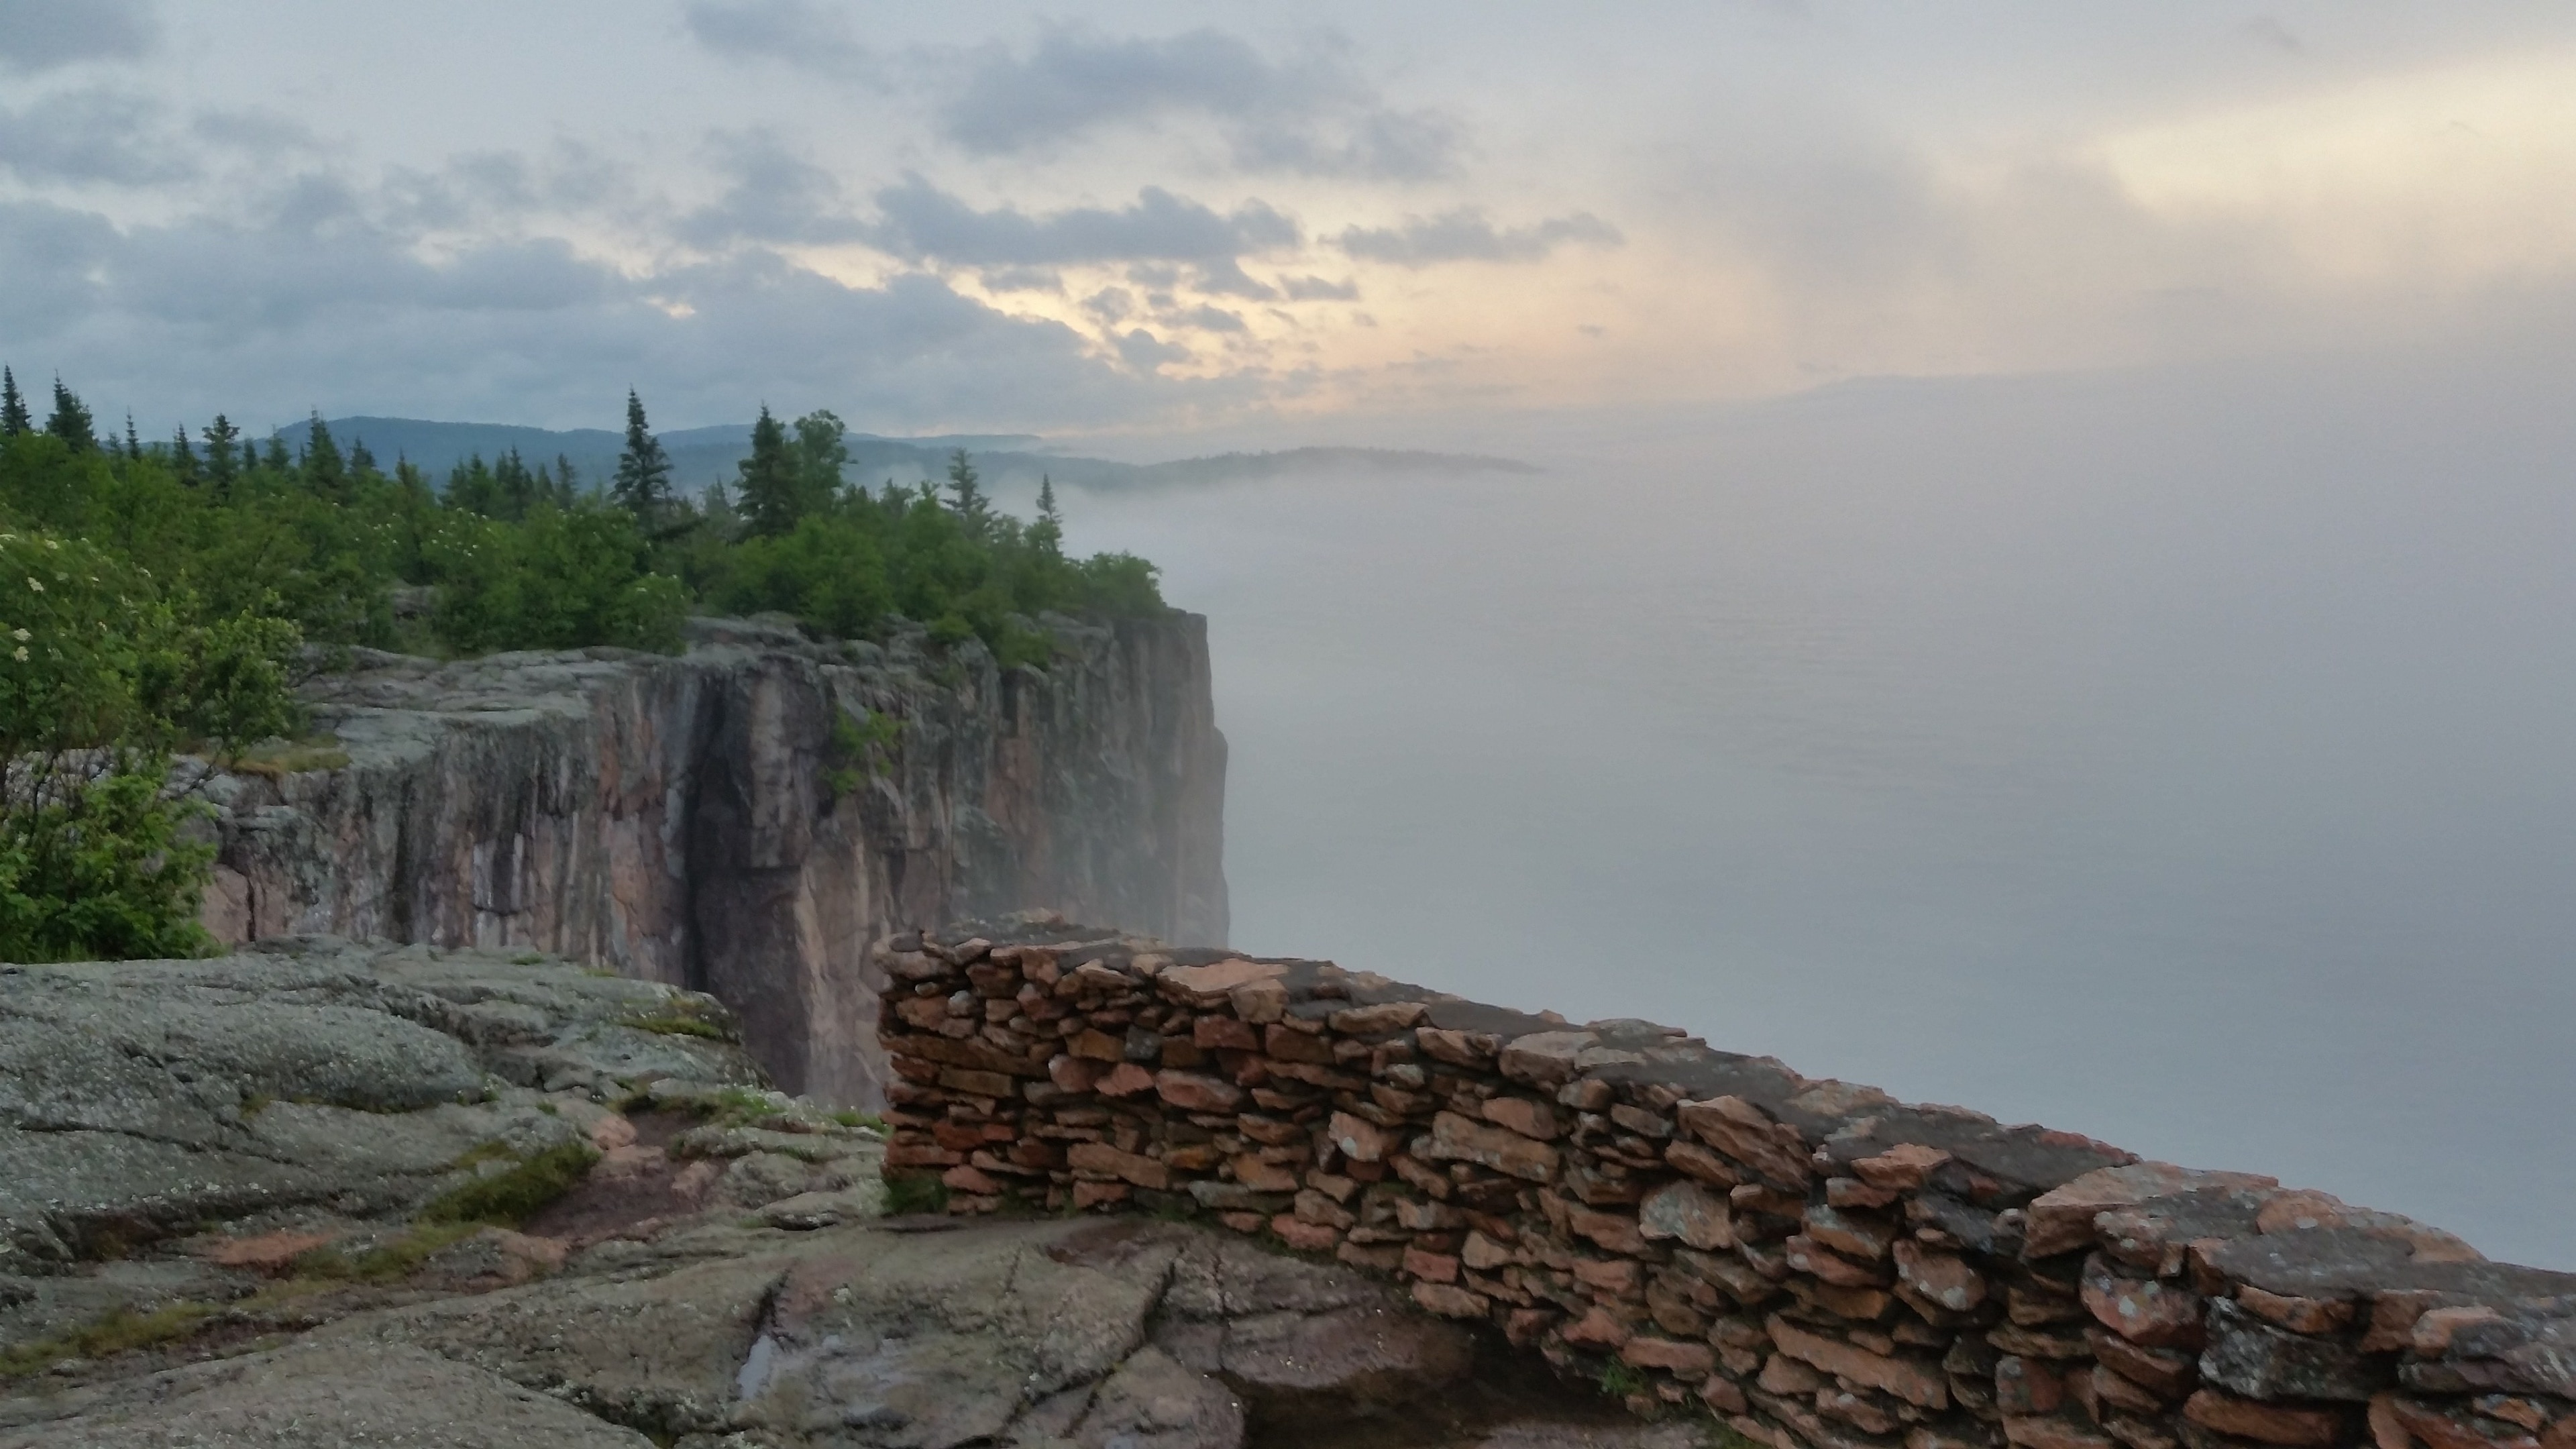 The North Shore is absolutely gorgeous.  This is one of my favorite pictures from vacationing there this summer.
#overlook #cliffs #foggy #likealocal #northshore 